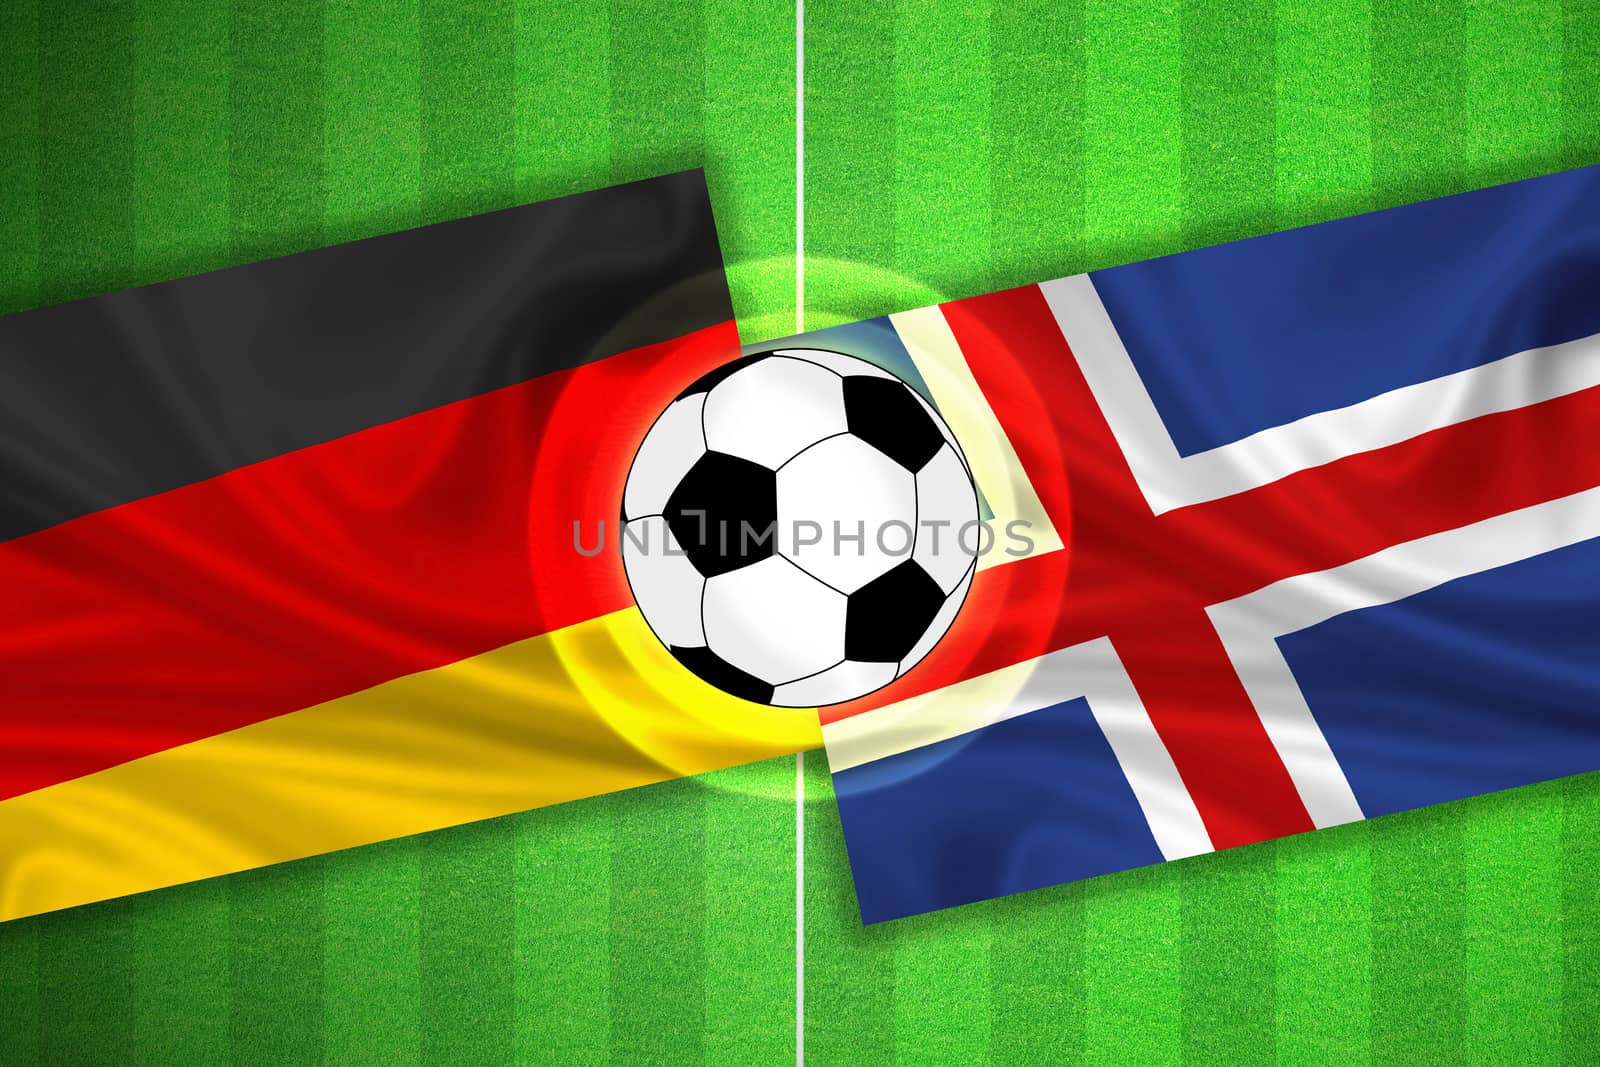 green Soccer / Football field with stripes and flags of germany - iceland, and ball.